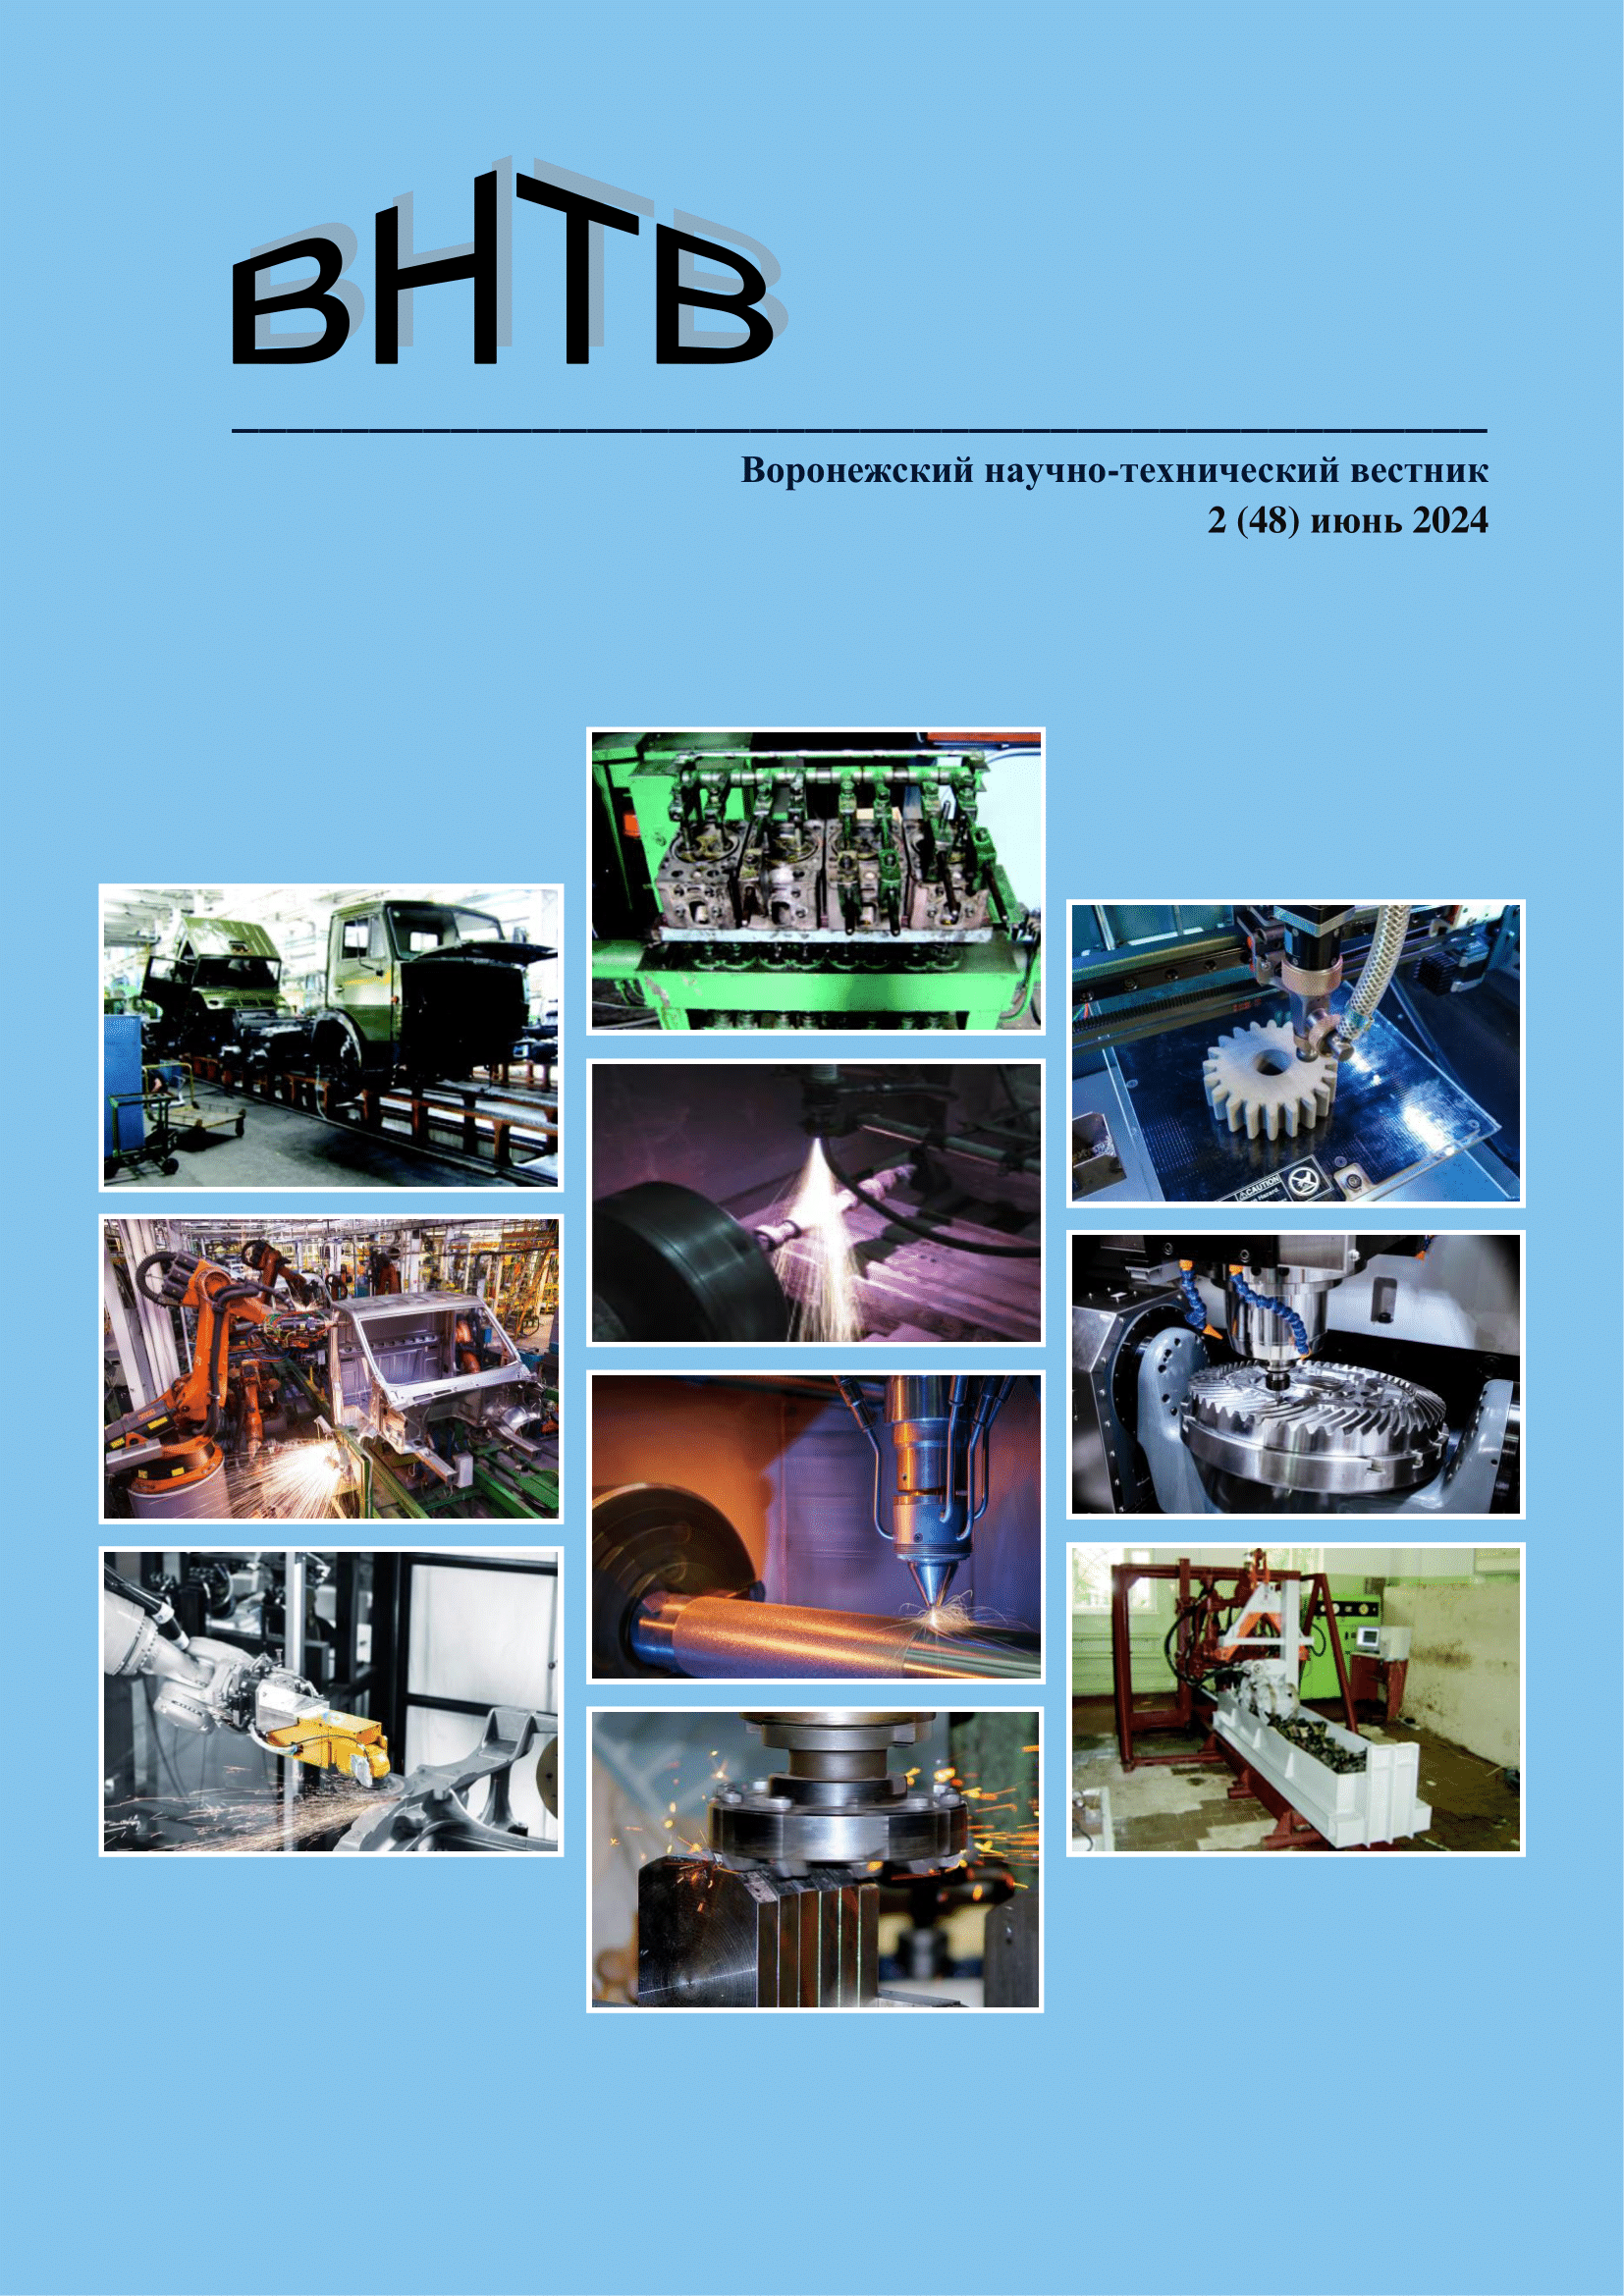                         FEATURES OF THE APPLICATION OF ADDITIVE TECHNOLOGIES IN THE MANUFACTURE OF HIGH-TECH PRODUCTS AT MACHINE-BUILDING ENTERPRISES
            